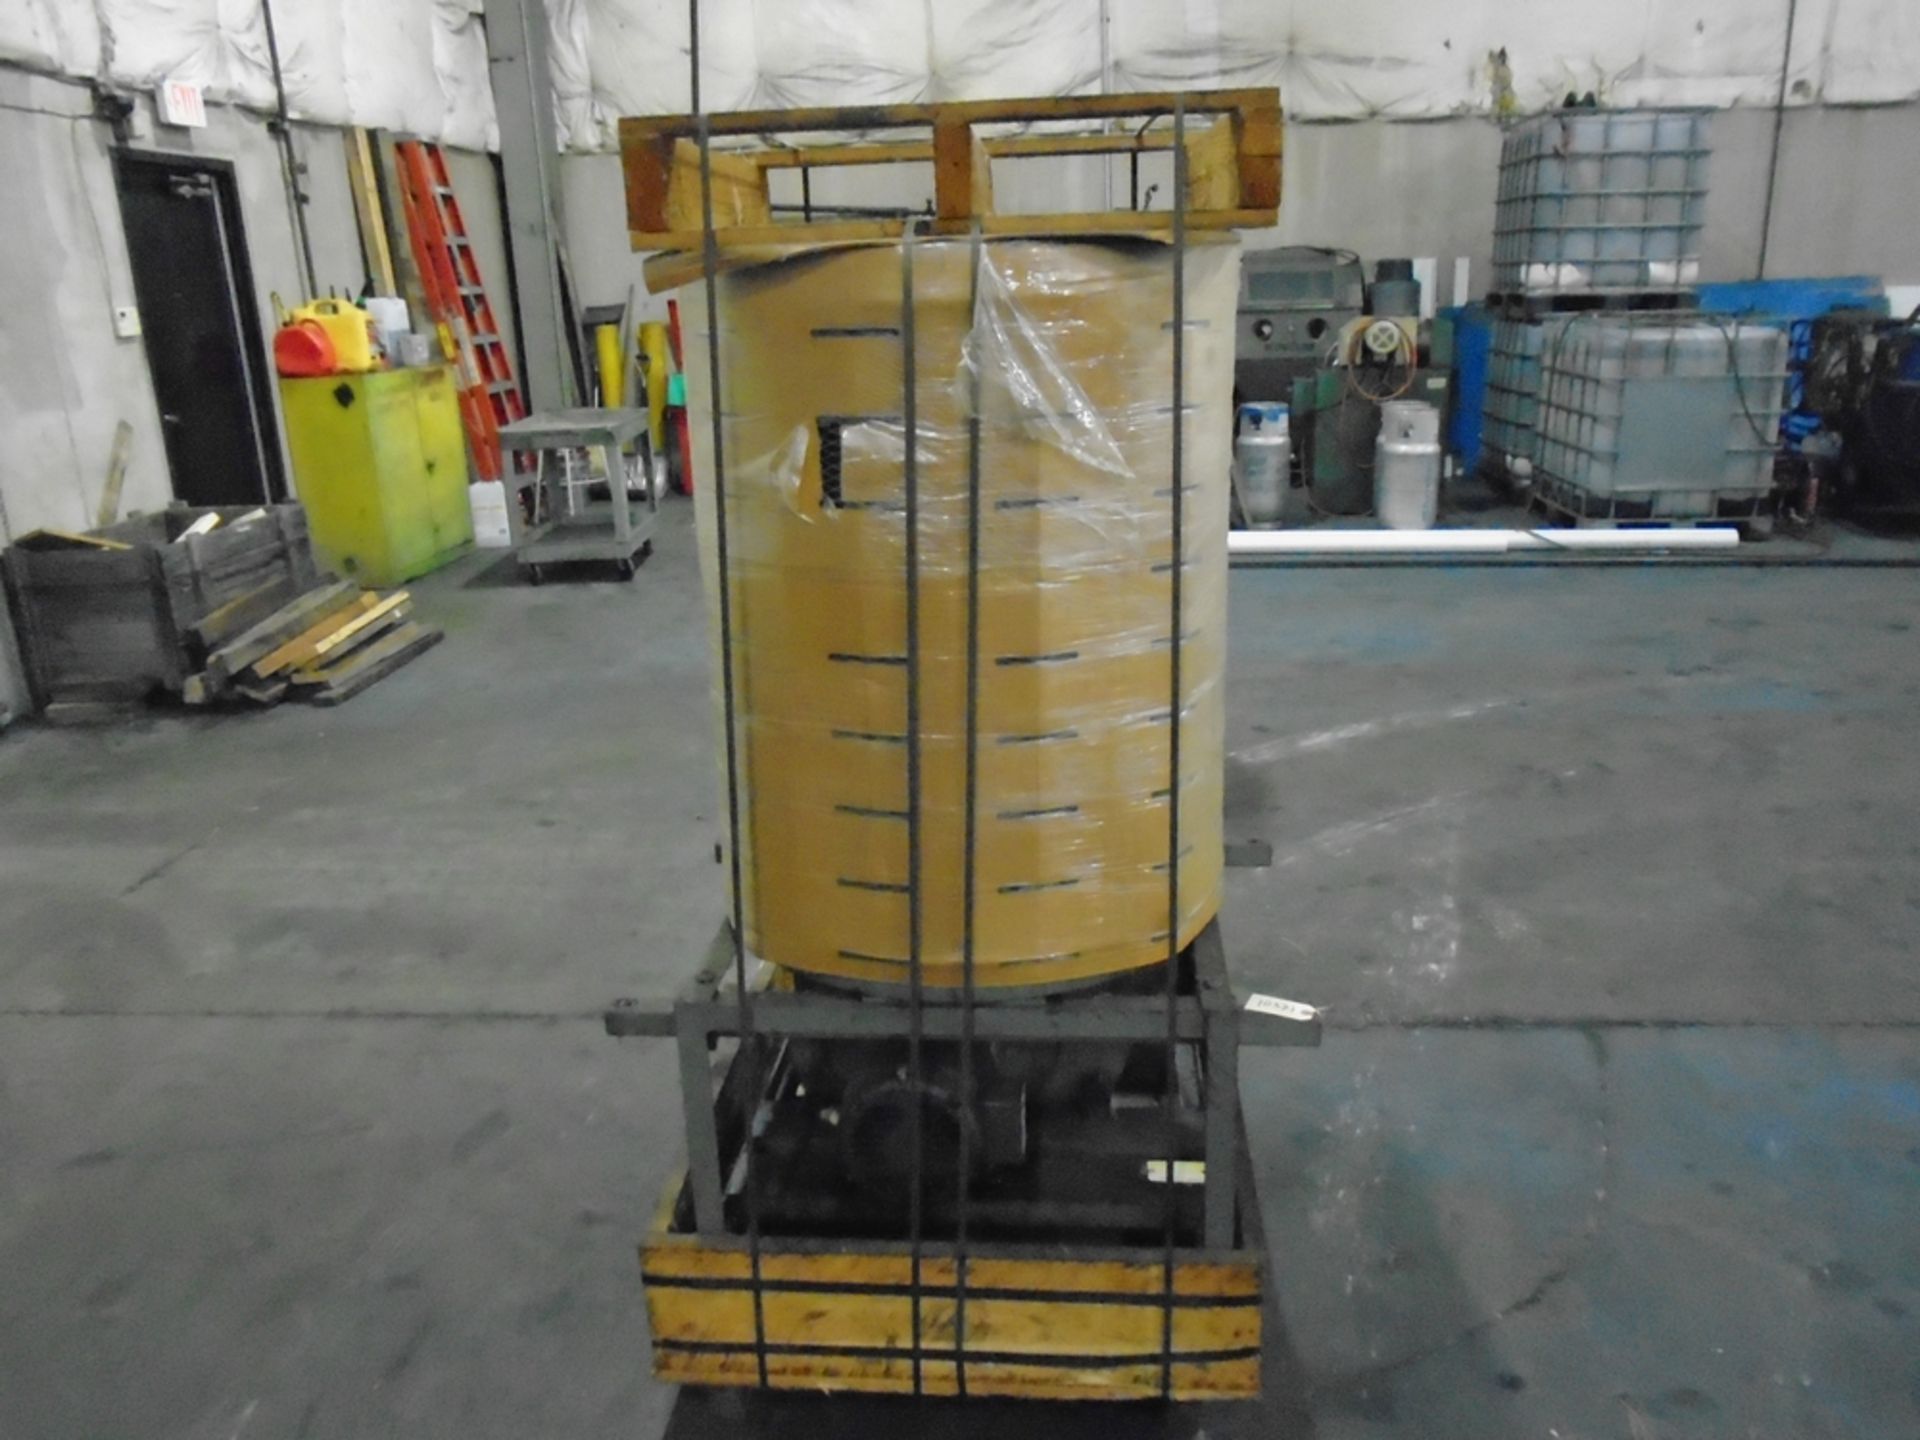 Aget VC-51 Mist/Dust Collector 27" dia x 35" H Mistkop 3 HP/230/460V 3PH We can provide loading